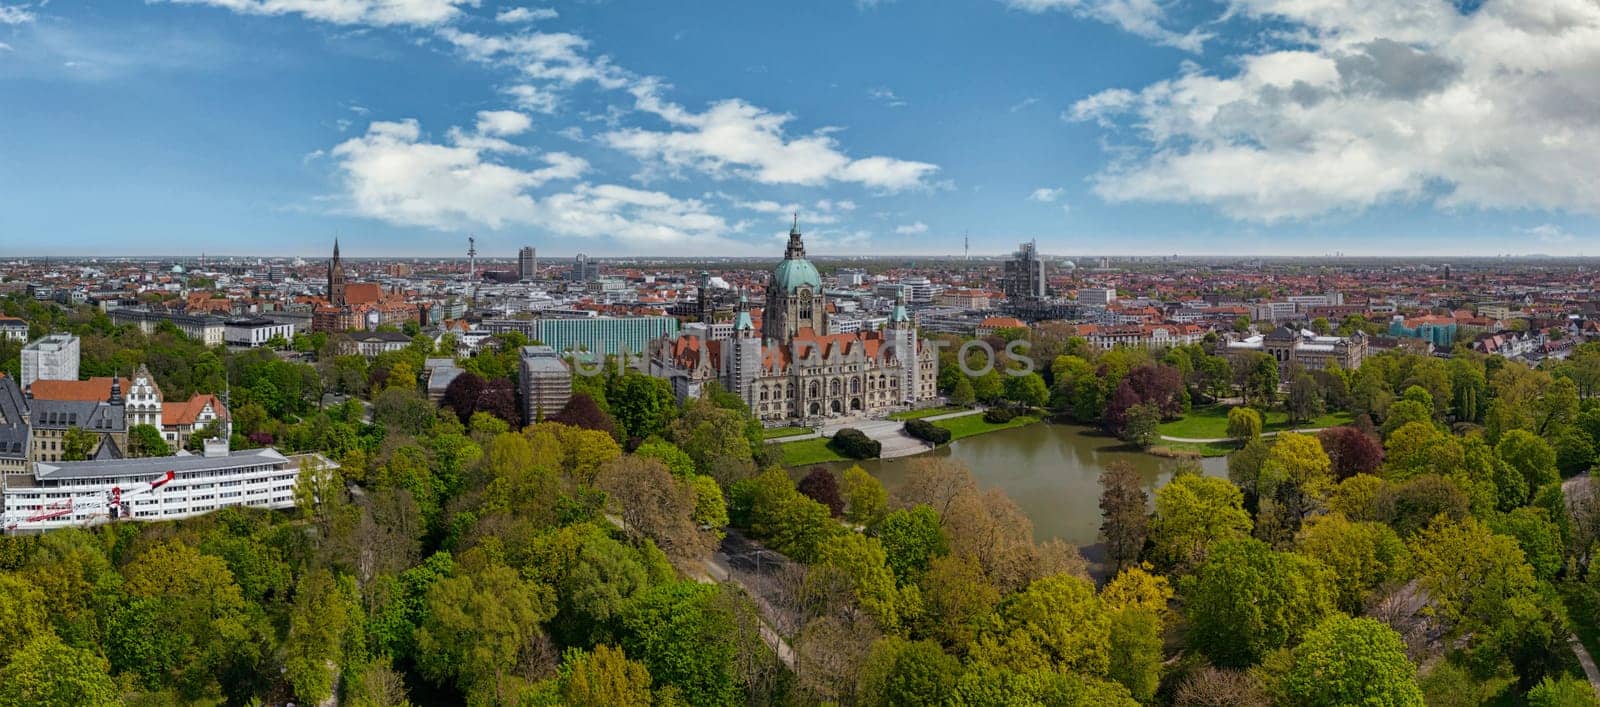 Aerial view of historic new town hall of Hanover and city centre in the background, Germany